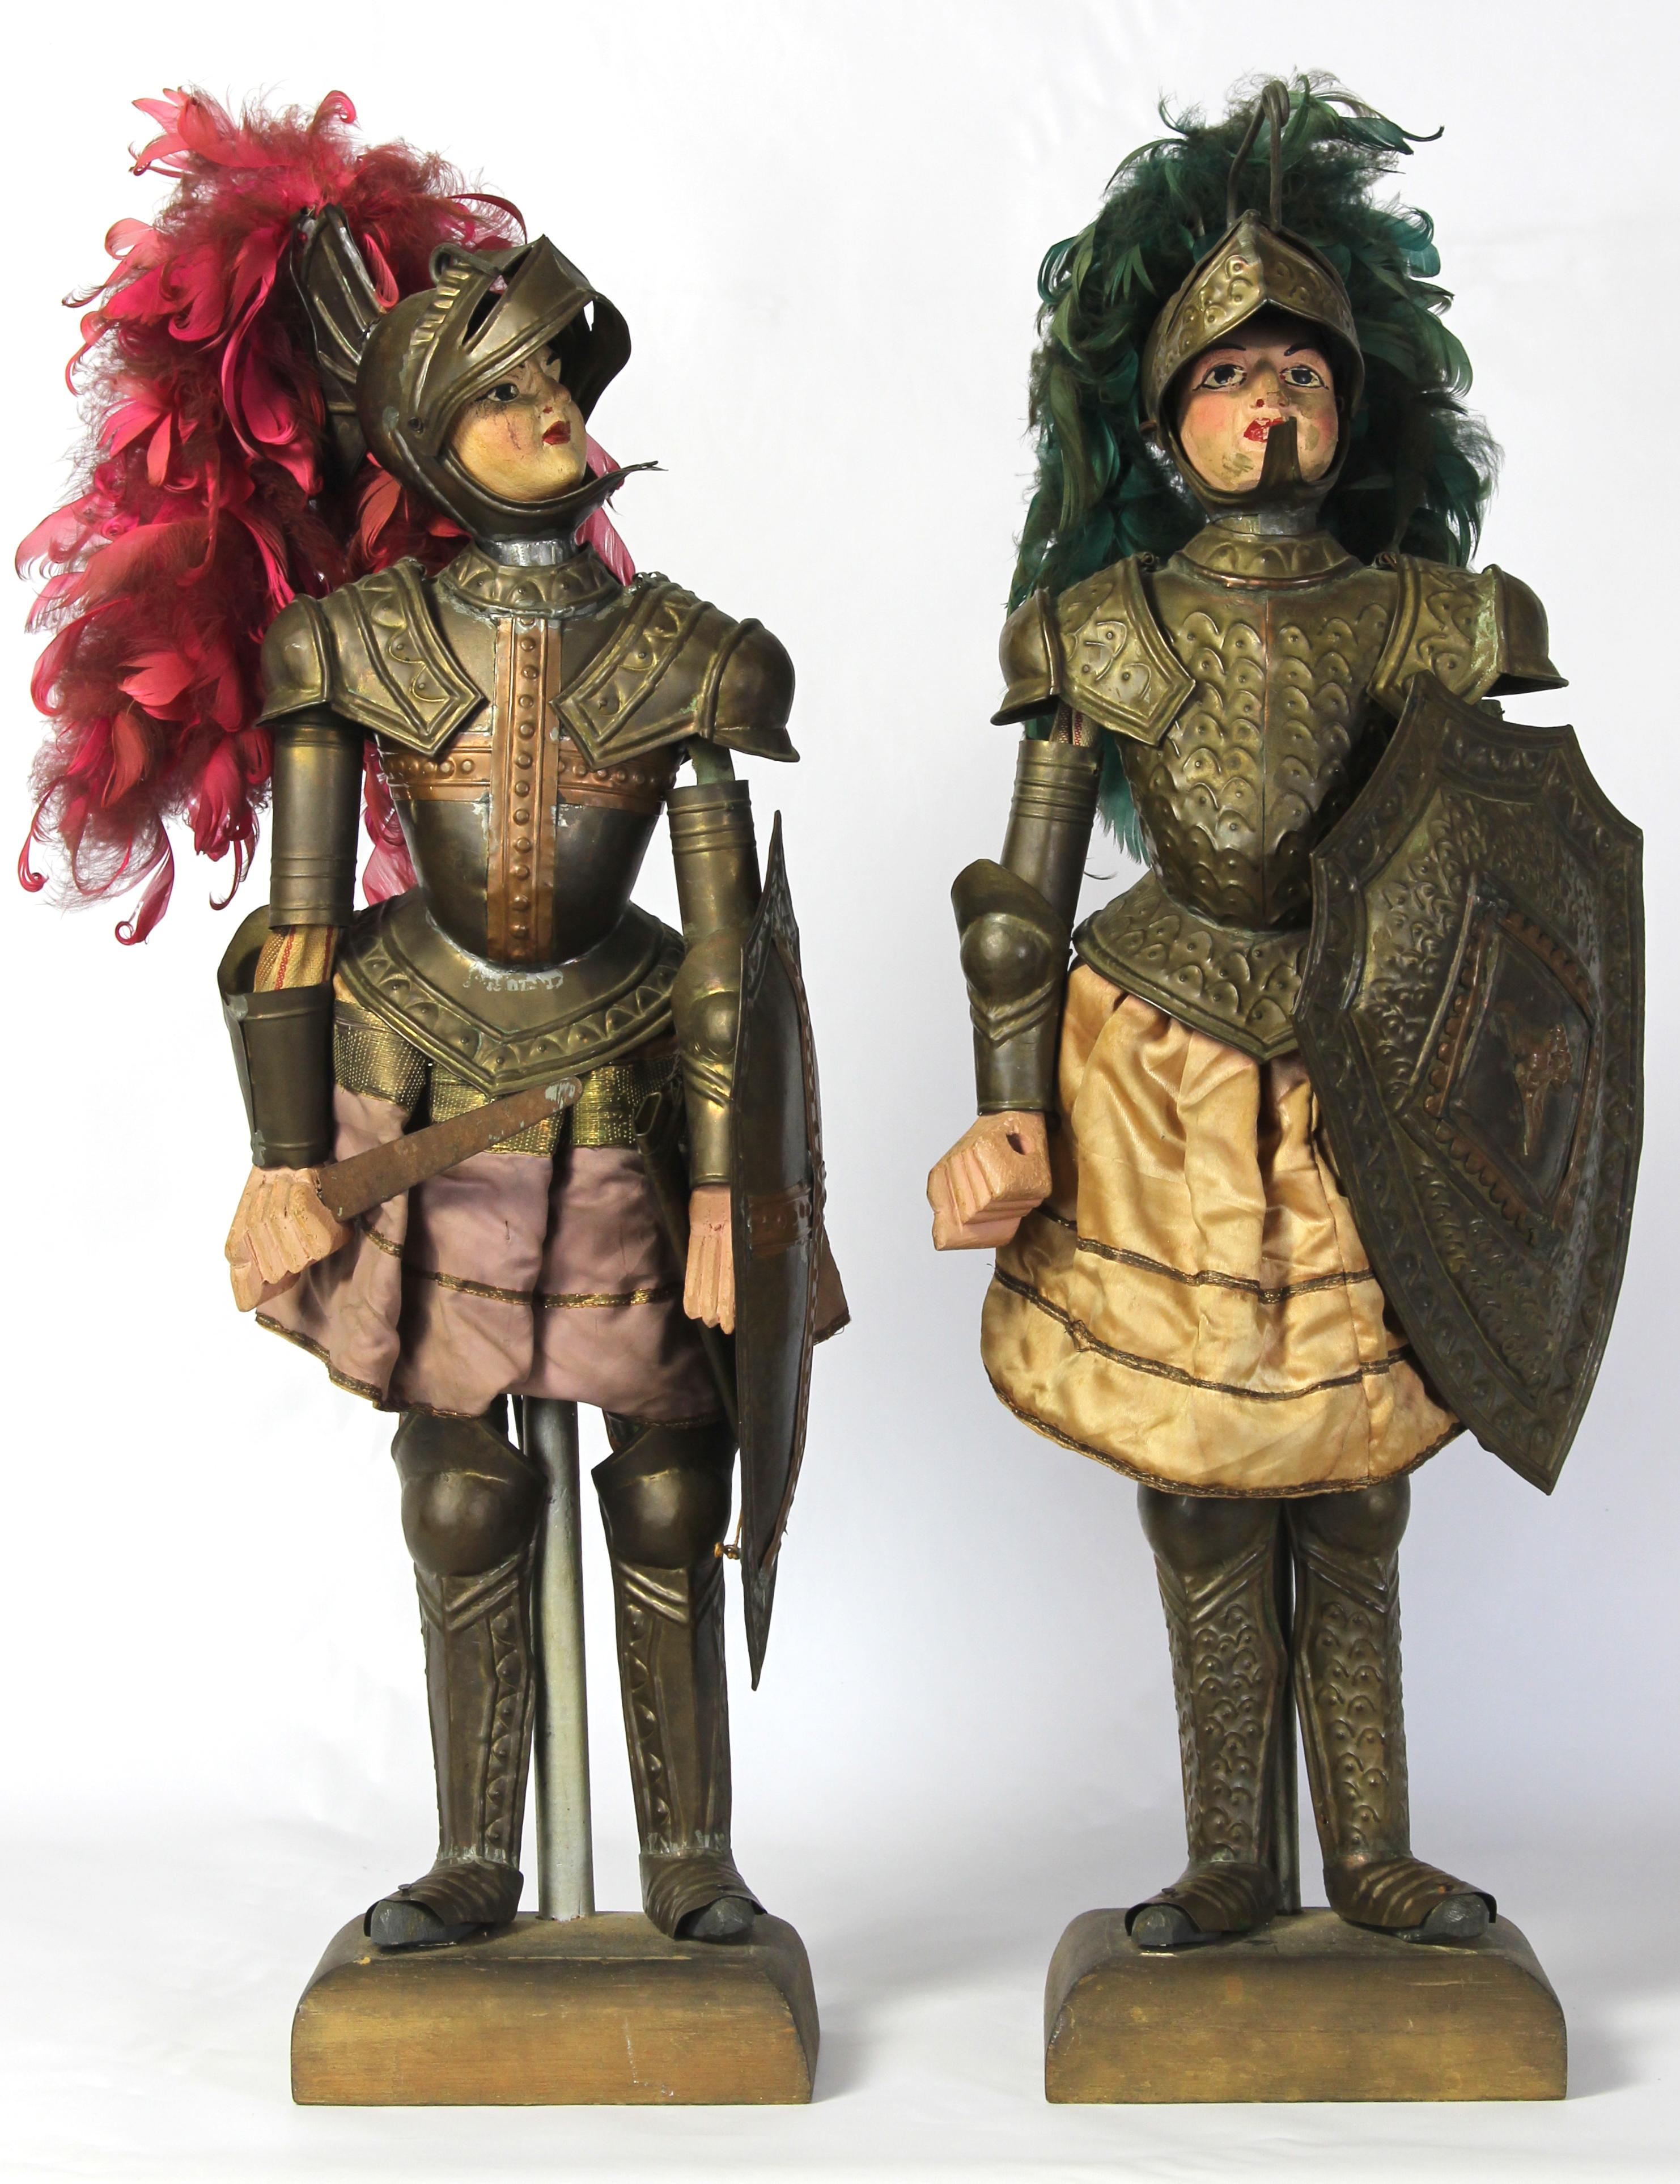 A charming pair of mid-19th century. Sicilian marionettes dressed in full suit of armor complete with brightly colored plumes.